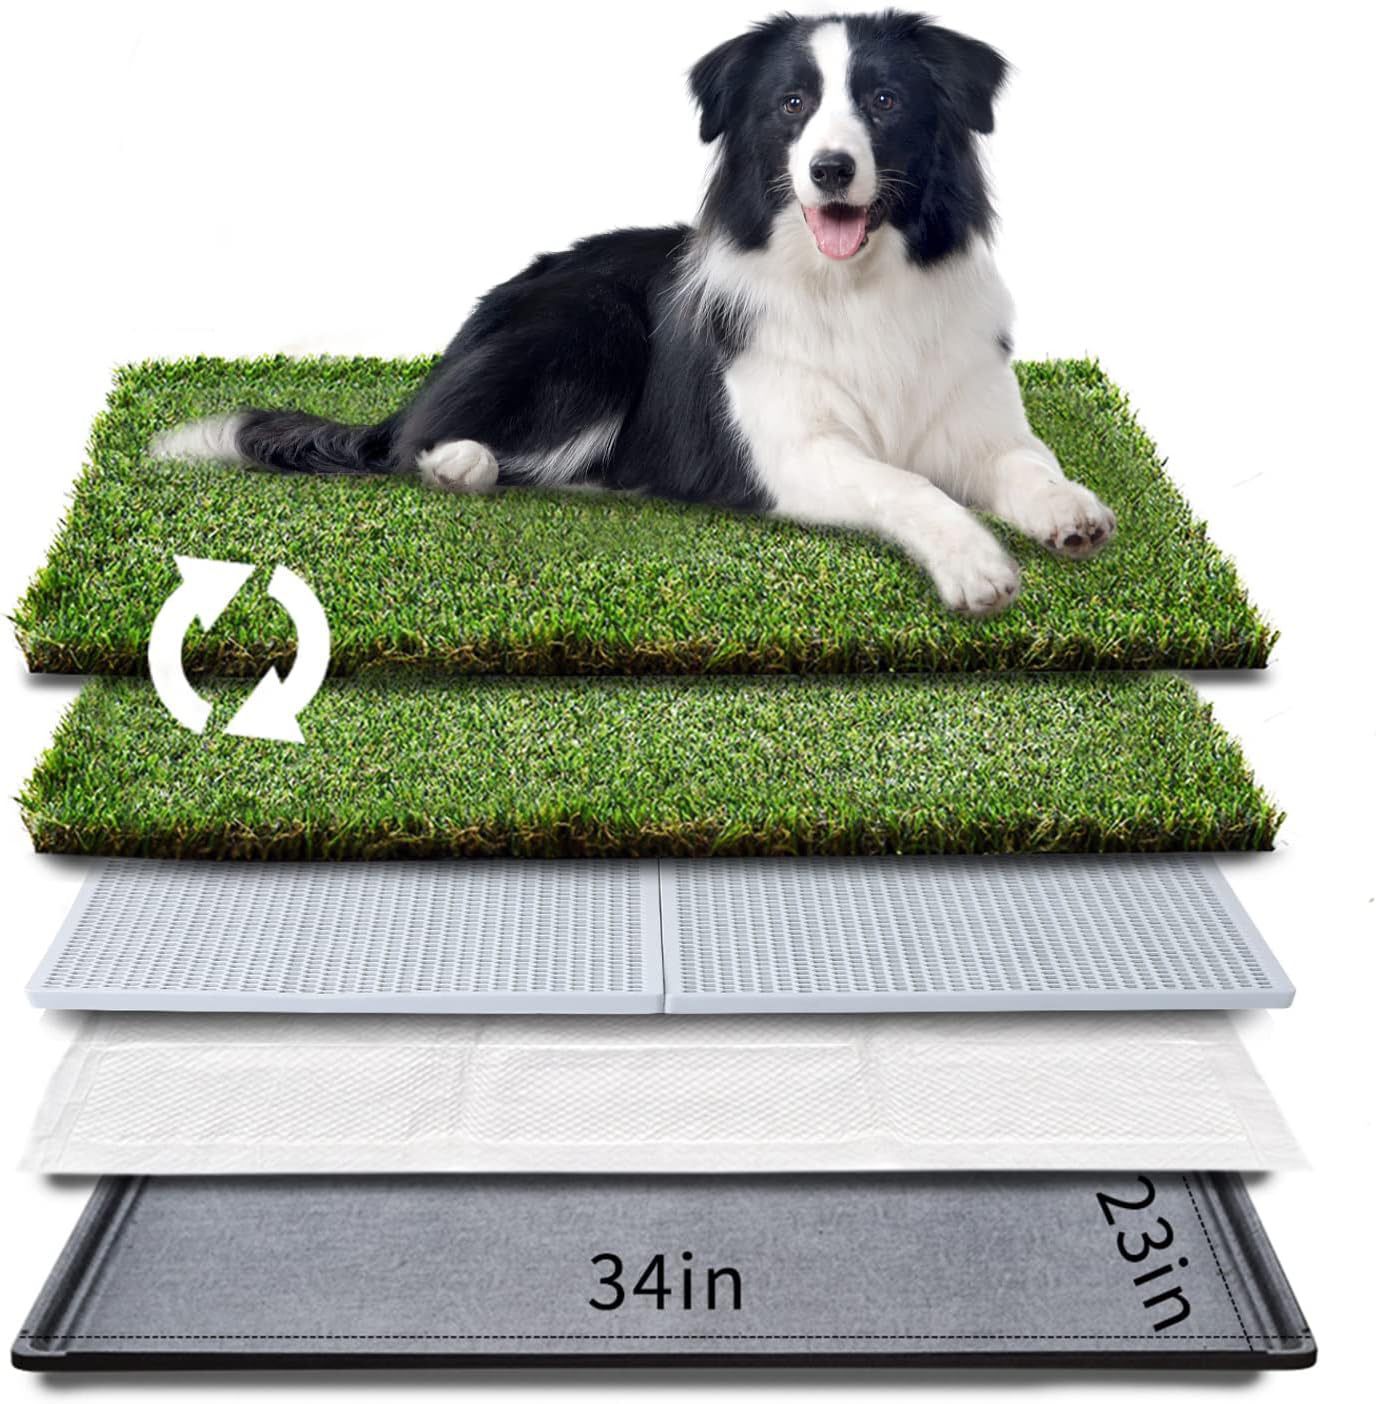 HQ4us Large Dog Grass Pee Pad with Tray, Dog Litter Box Toilet 34"×23", 2×Artificial Grass for Dogs with Anti-Bite Edge, Pee pad, Realisti, Less Stink